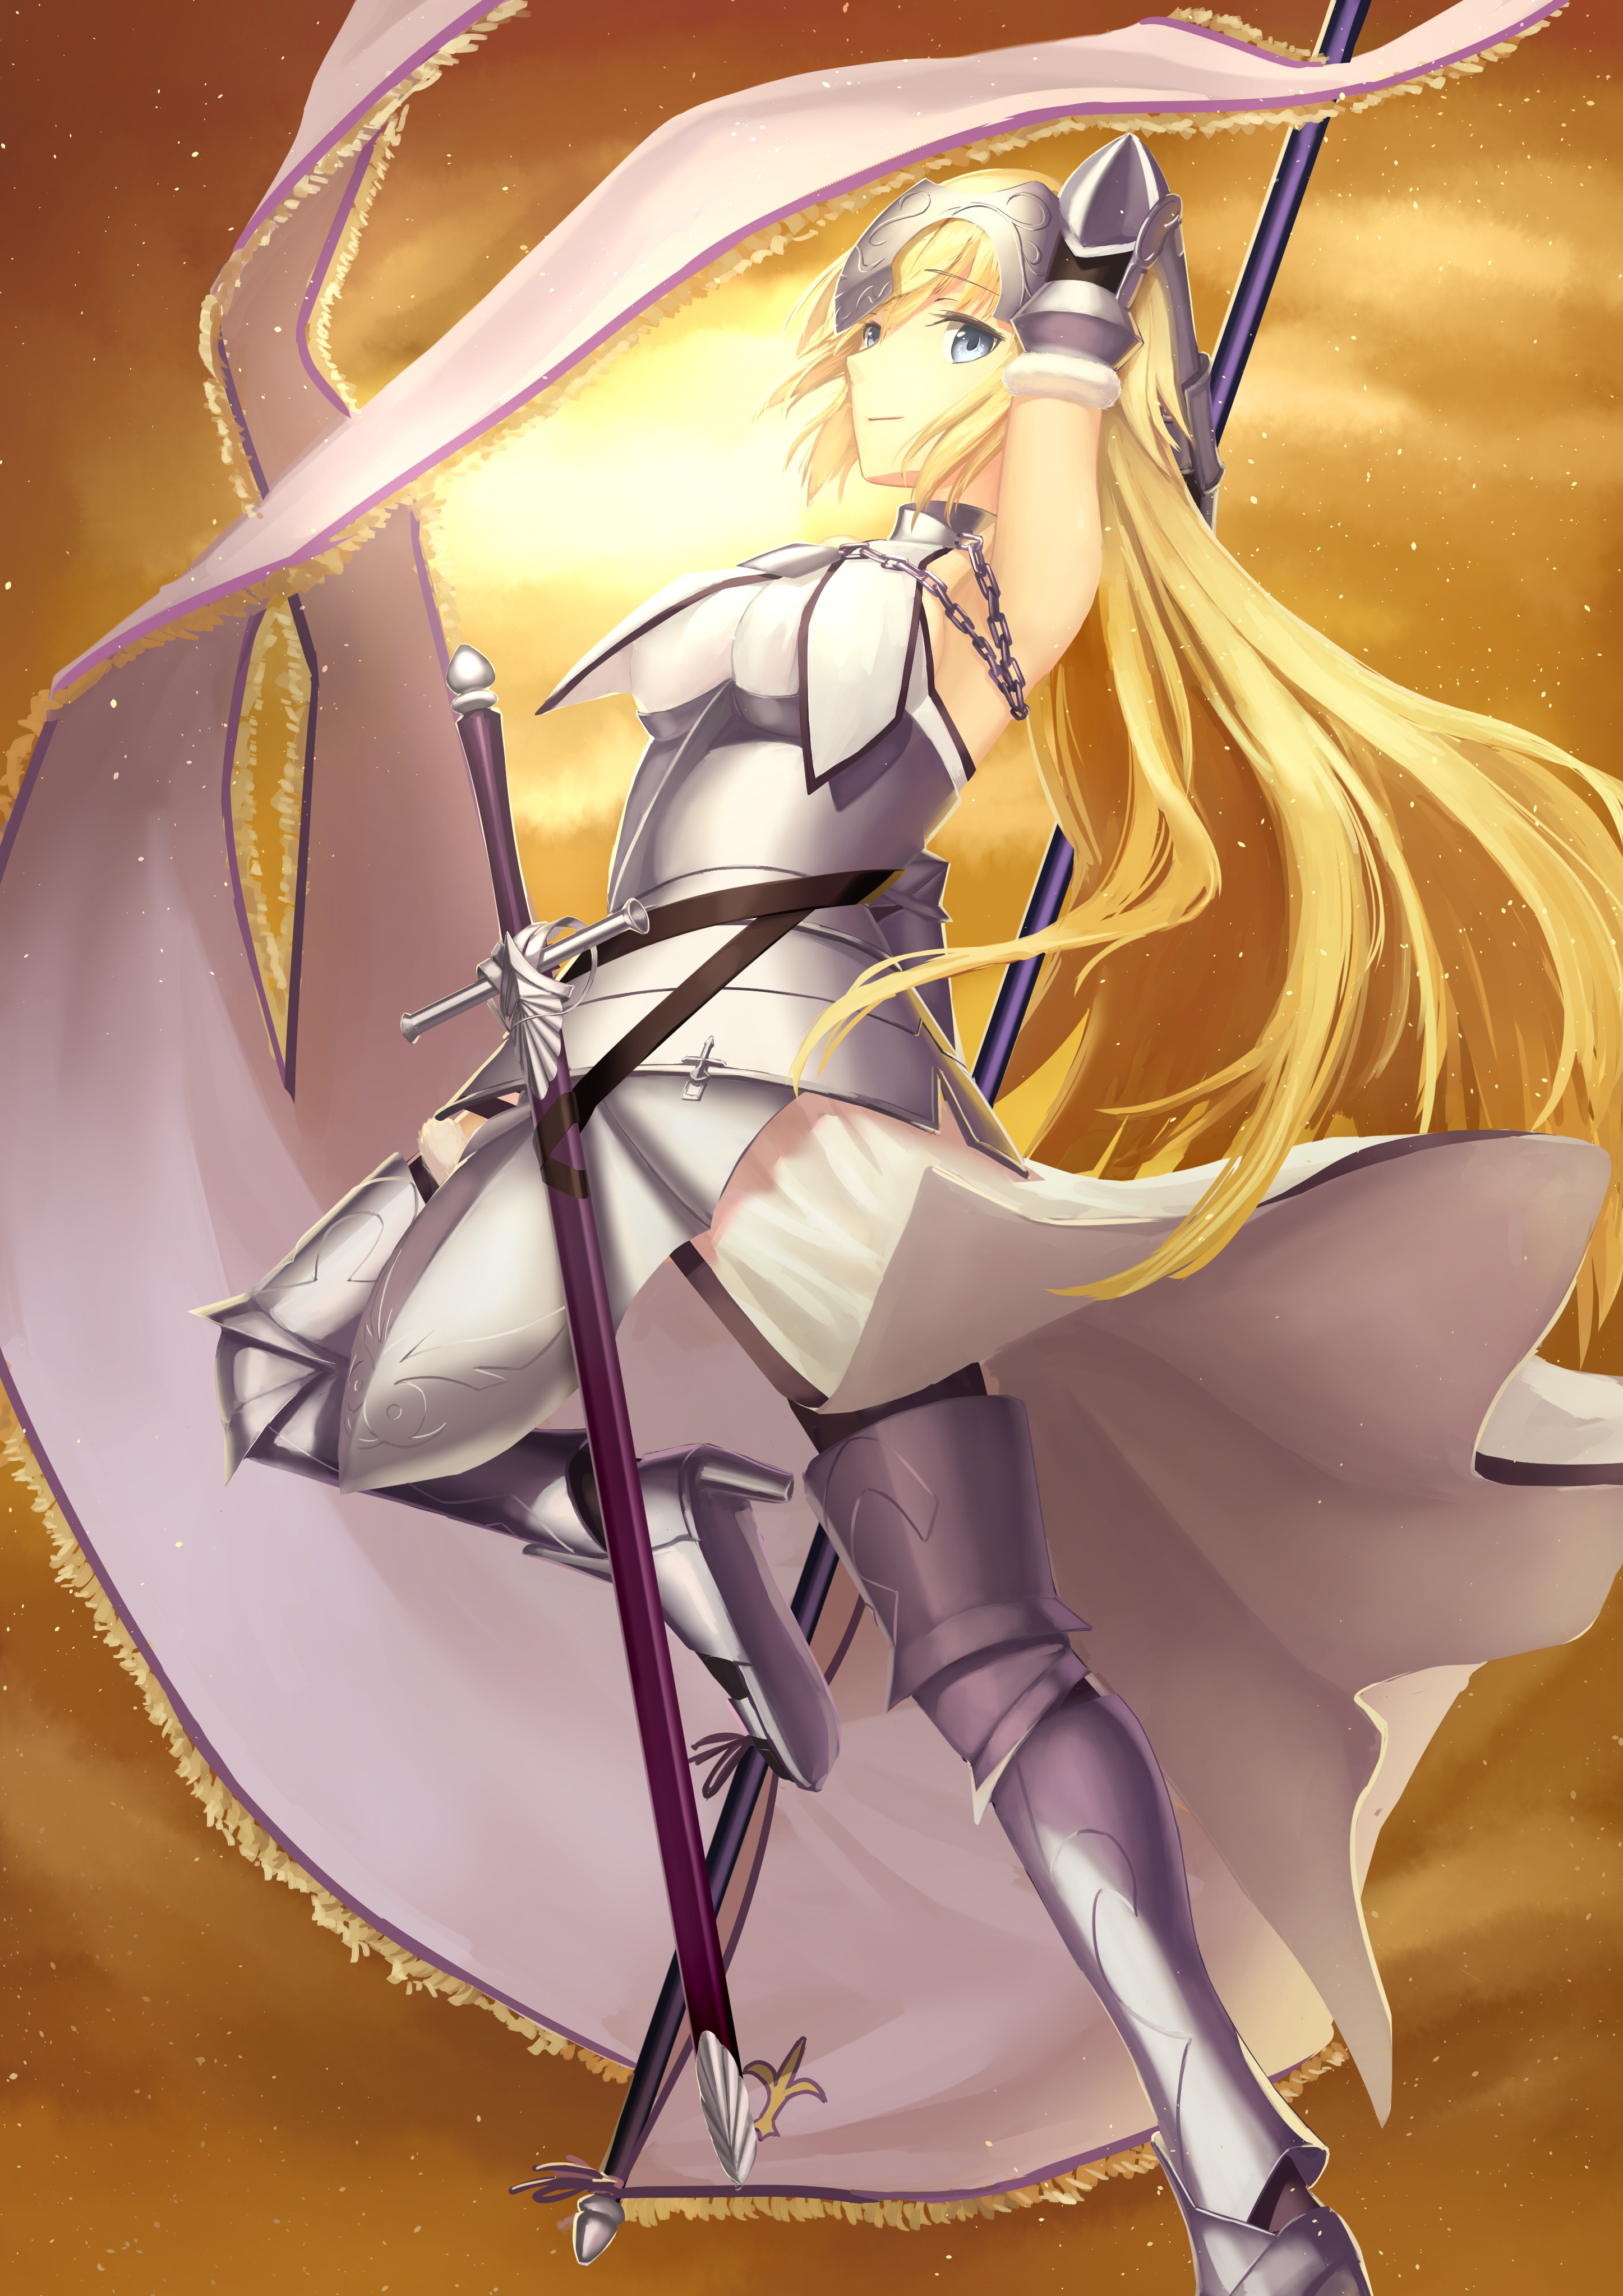 Anime 2894x4093 anime anime girls Fate/Grand Order long hair blonde armor sword Fate series Fate/Apocrypha  Jeanne d'Arc (Fate) Ccjn Pixiv women with swords fantasy art fantasy girl fantasy armor